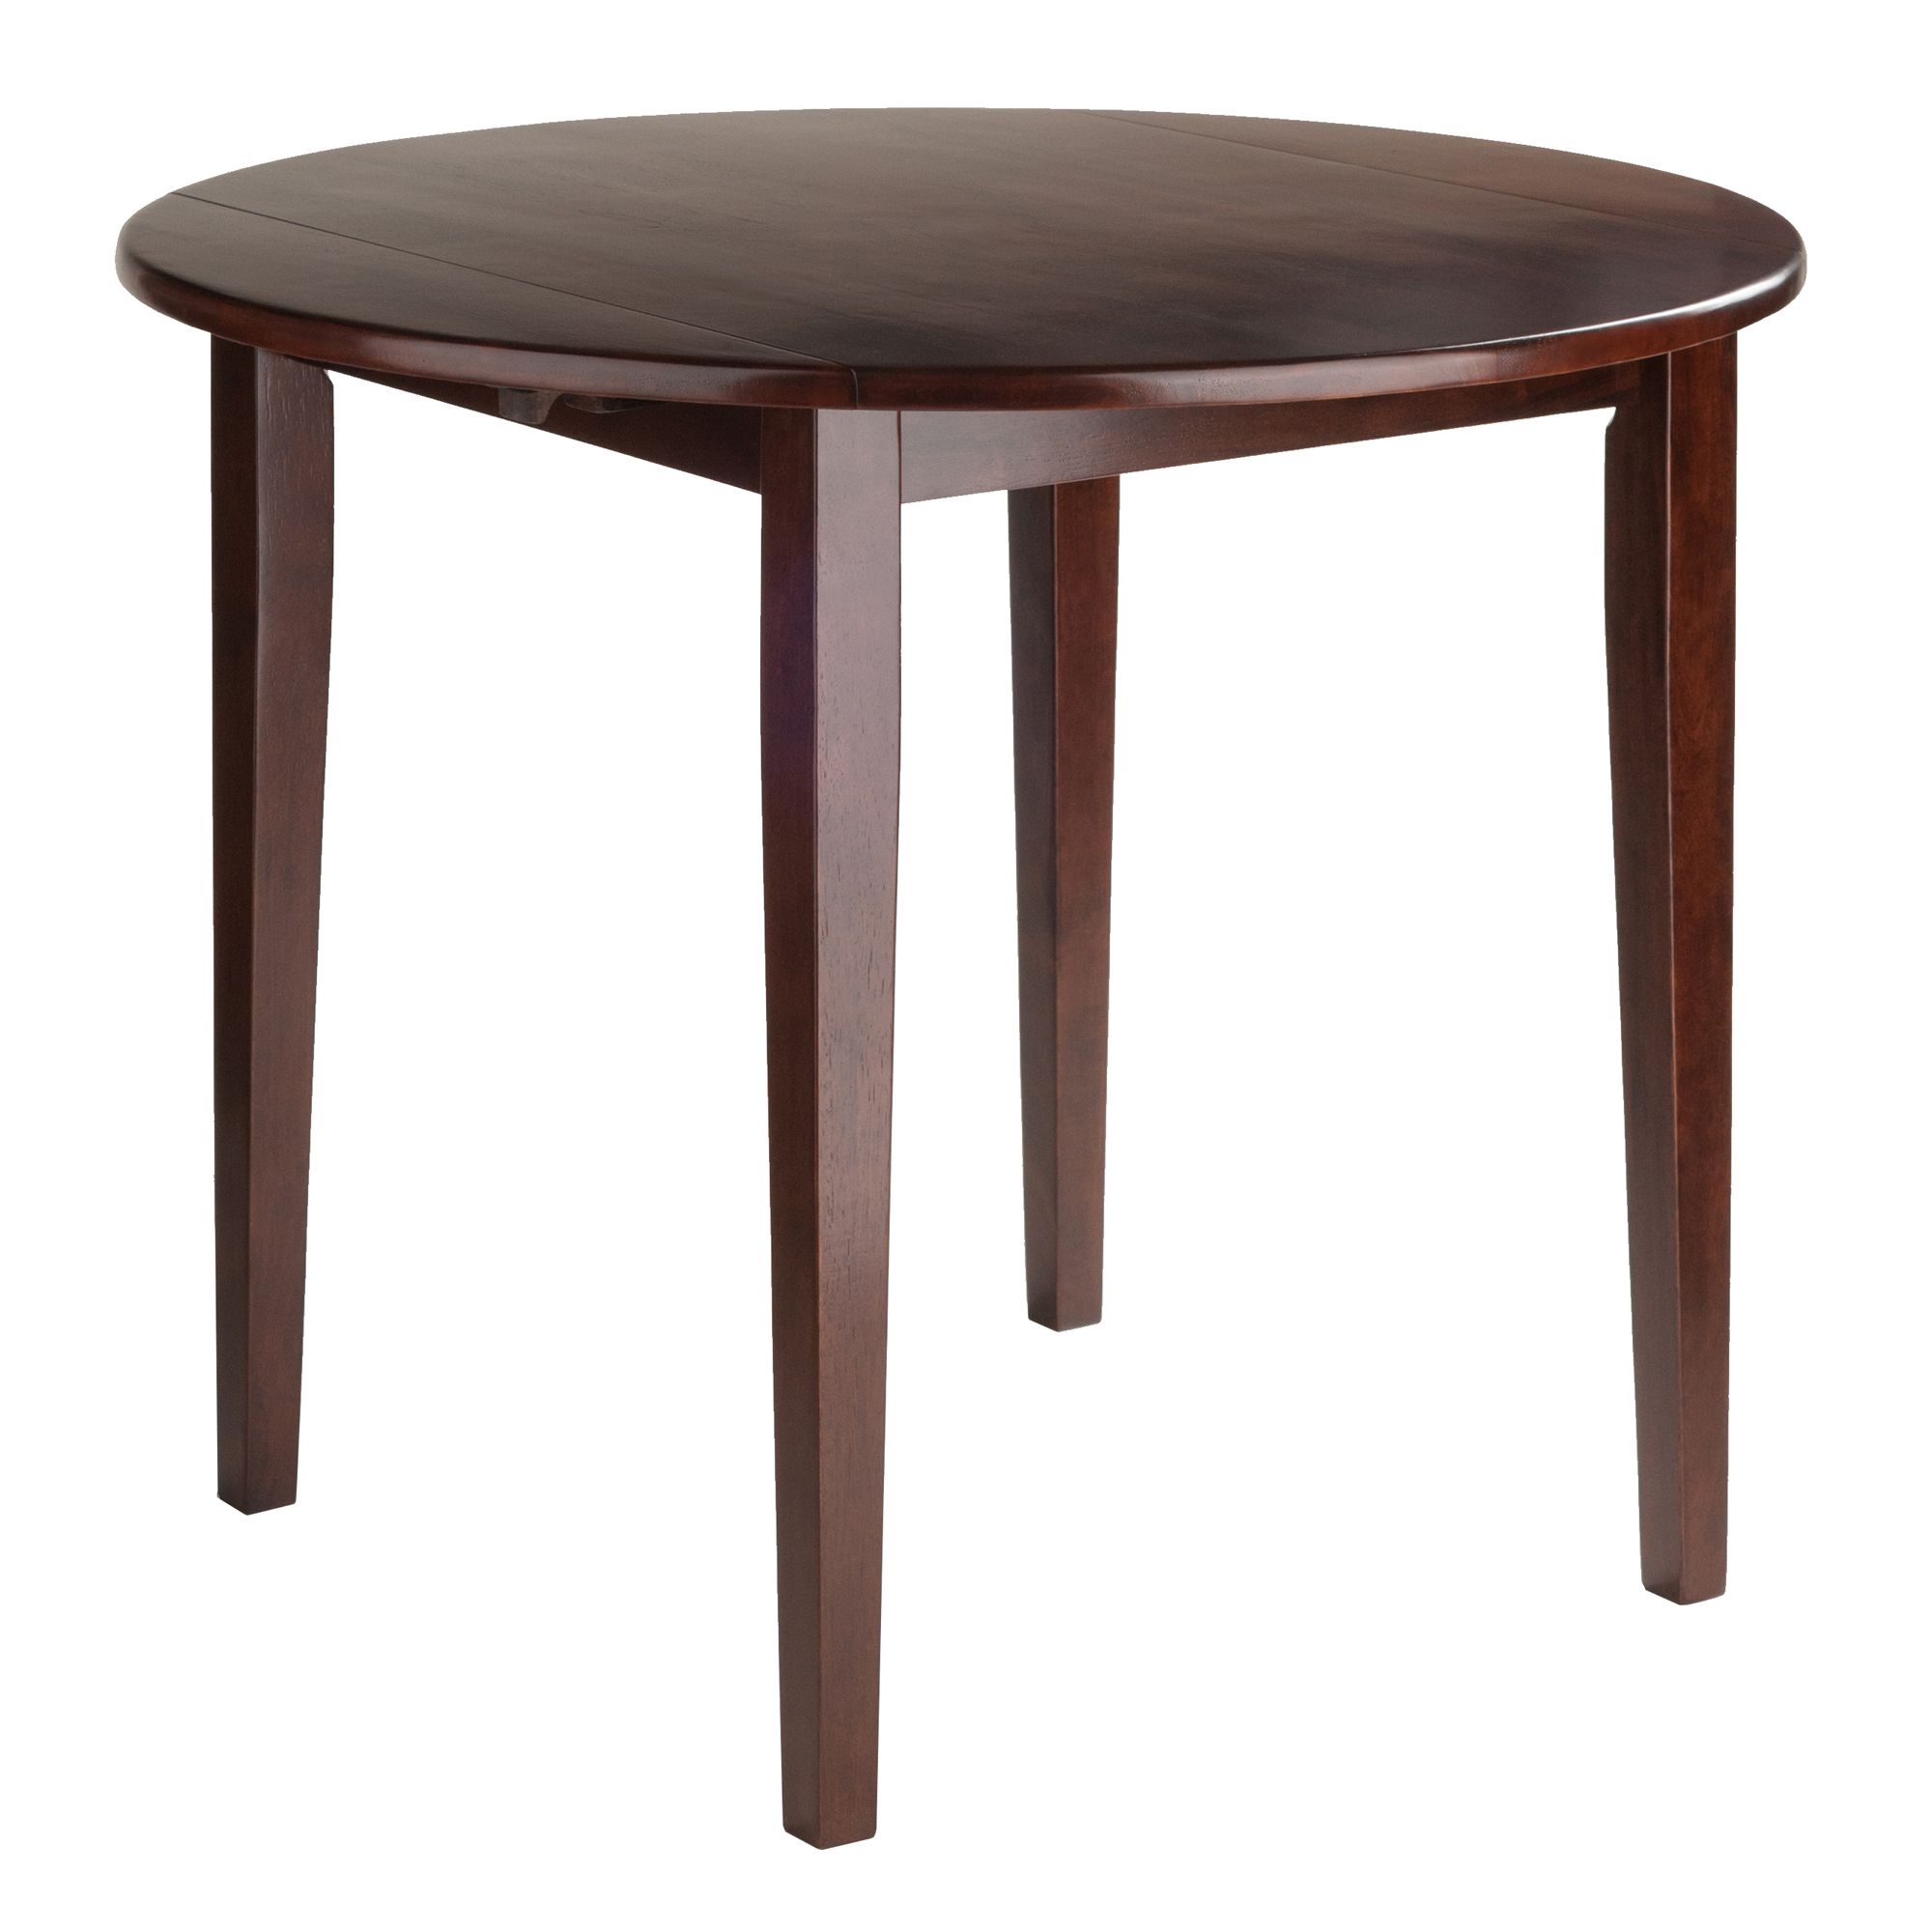 Well Liked Winsome Wood Clayton Round Drop Leaf Dining Table, Walnut In Nalan 38'' Dining Tables (View 9 of 20)